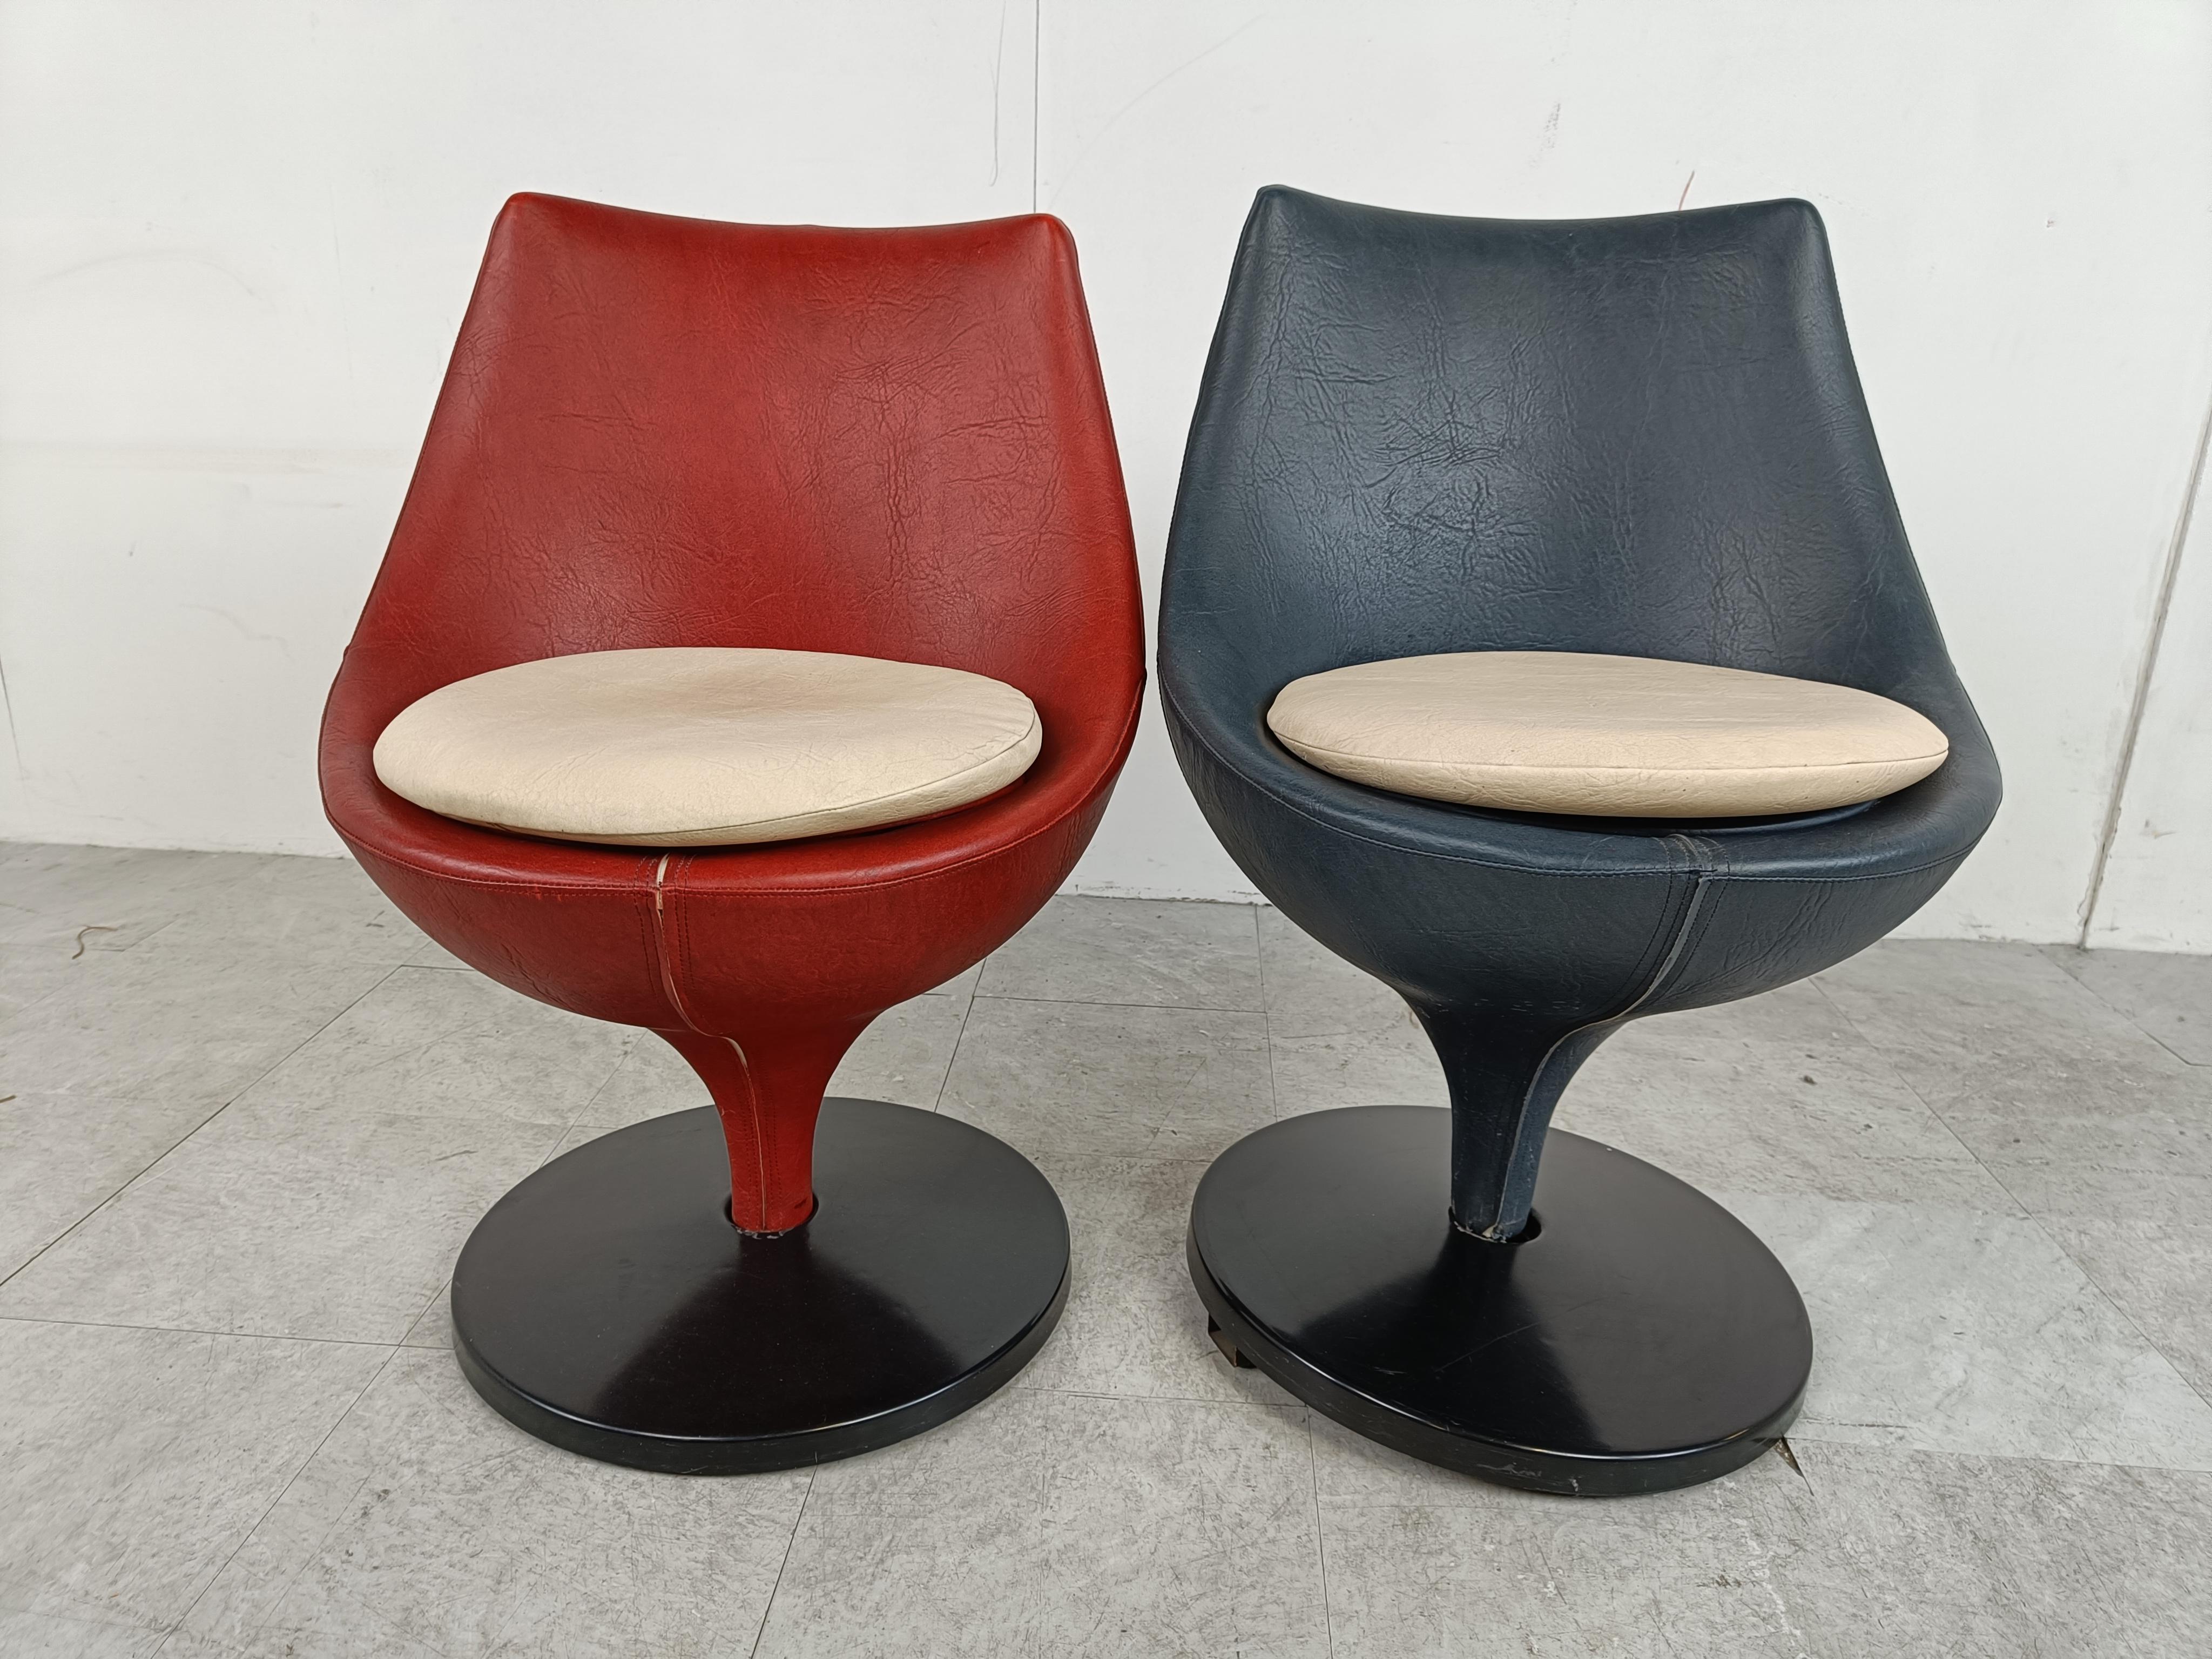 Pair of Polaris Chairs by Pierre Guariche for Meurop, 1960s For Sale 4